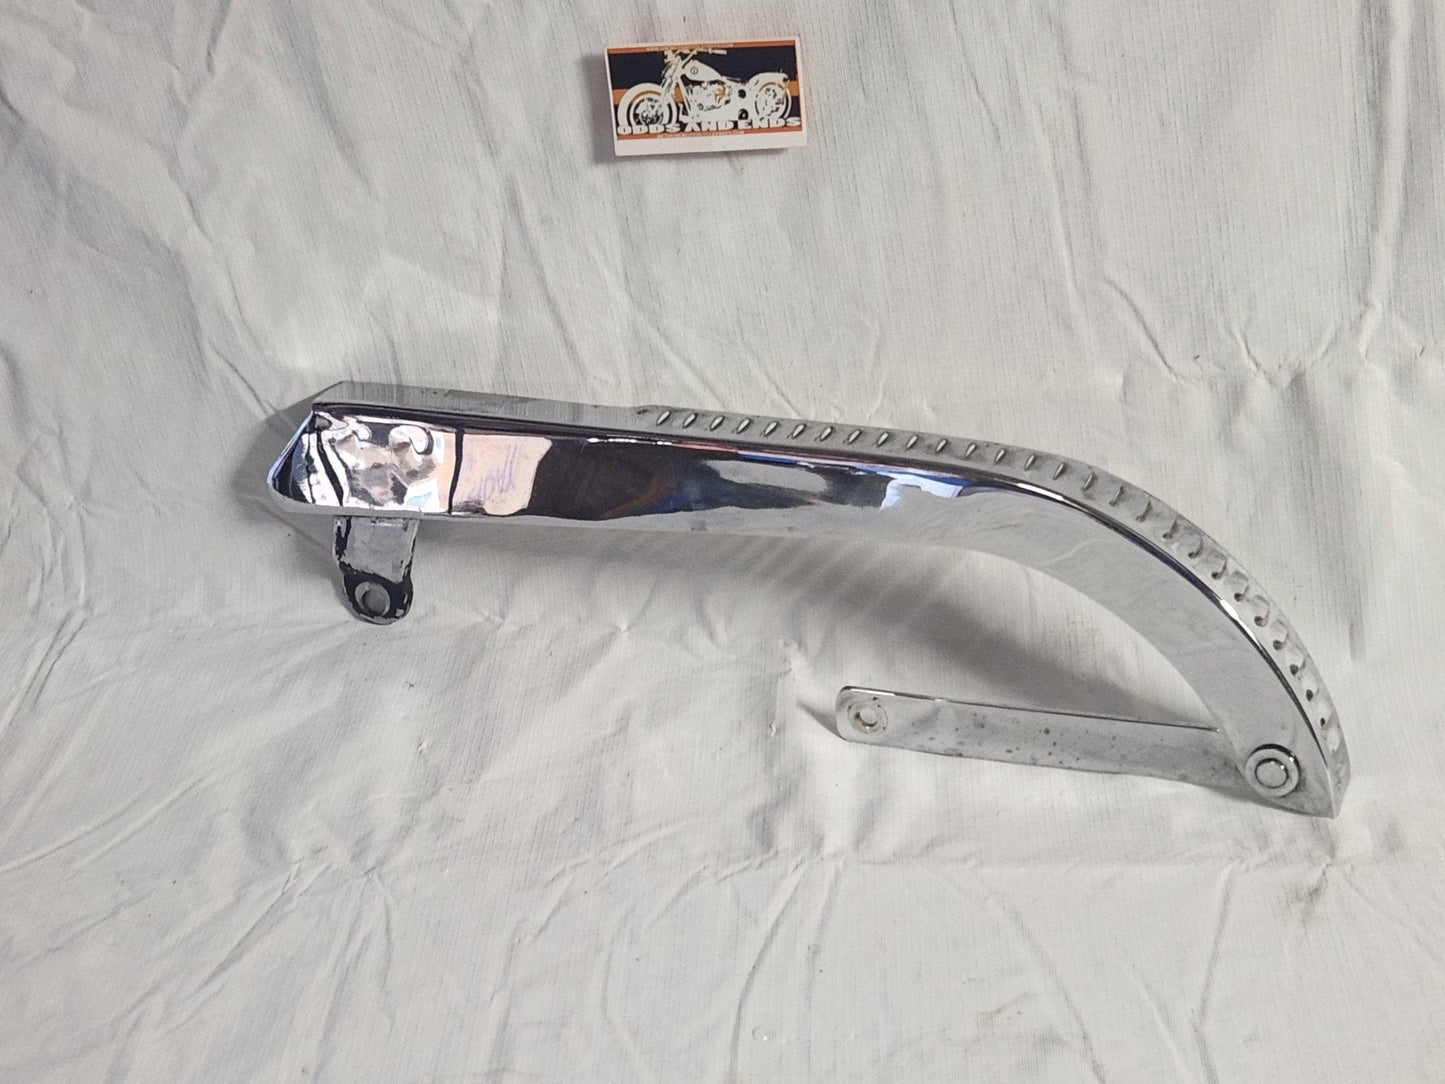 Harley Chrome Ripper Rear Chain Guard - onemotorcycleparts.com